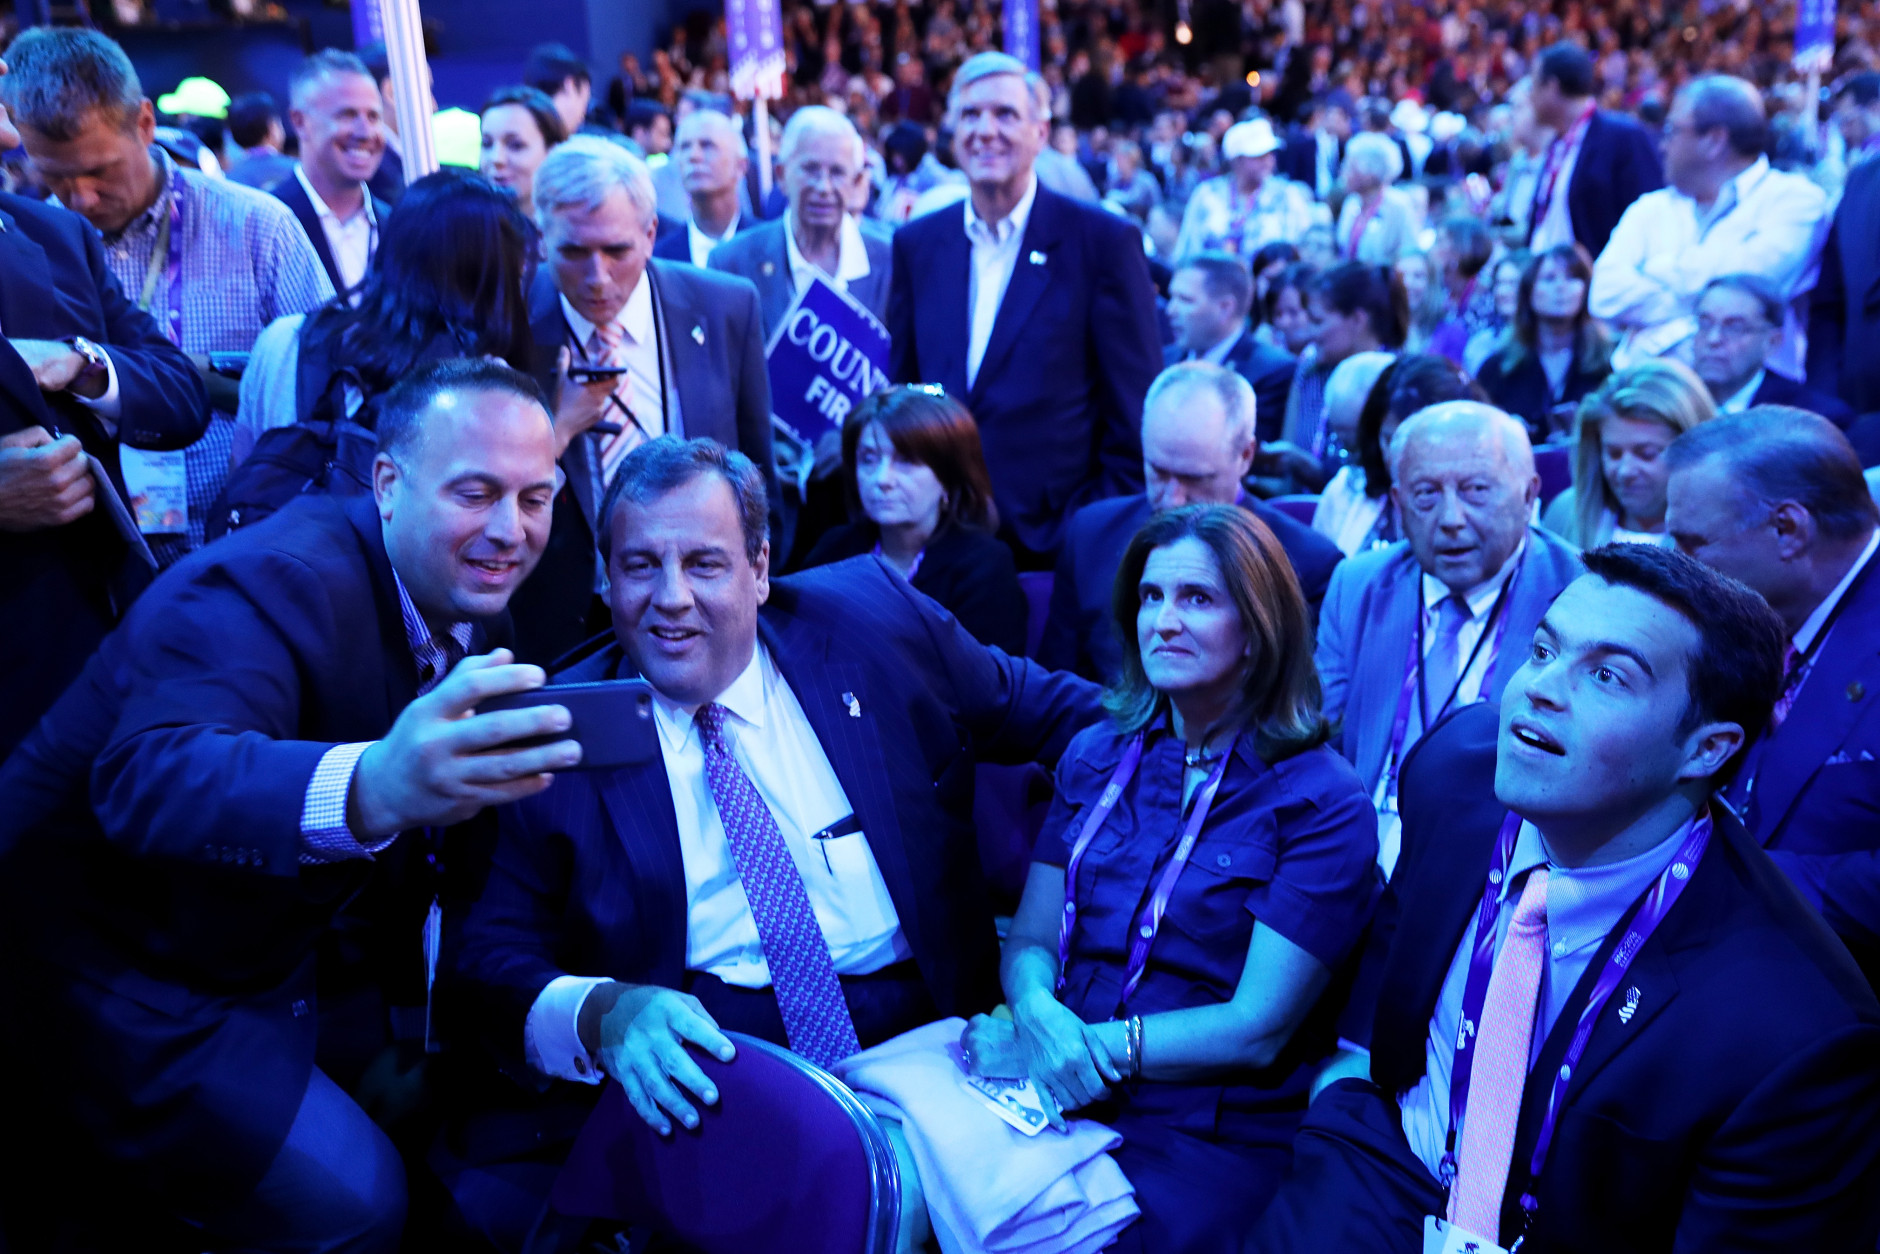 CLEVELAND, OH - JULY 20:  New Jersey Gov. Chris Christie takes a photo with delegates on the third day of the Republican National Convention on July 20, 2016 at the Quicken Loans Arena in Cleveland, Ohio. Republican presidential candidate Donald Trump received the number of votes needed to secure the party's nomination. An estimated 50,000 people are expected in Cleveland, including hundreds of protesters and members of the media. The four-day Republican National Convention kicked off on July 18. (Photo by John Moore/Getty Images)